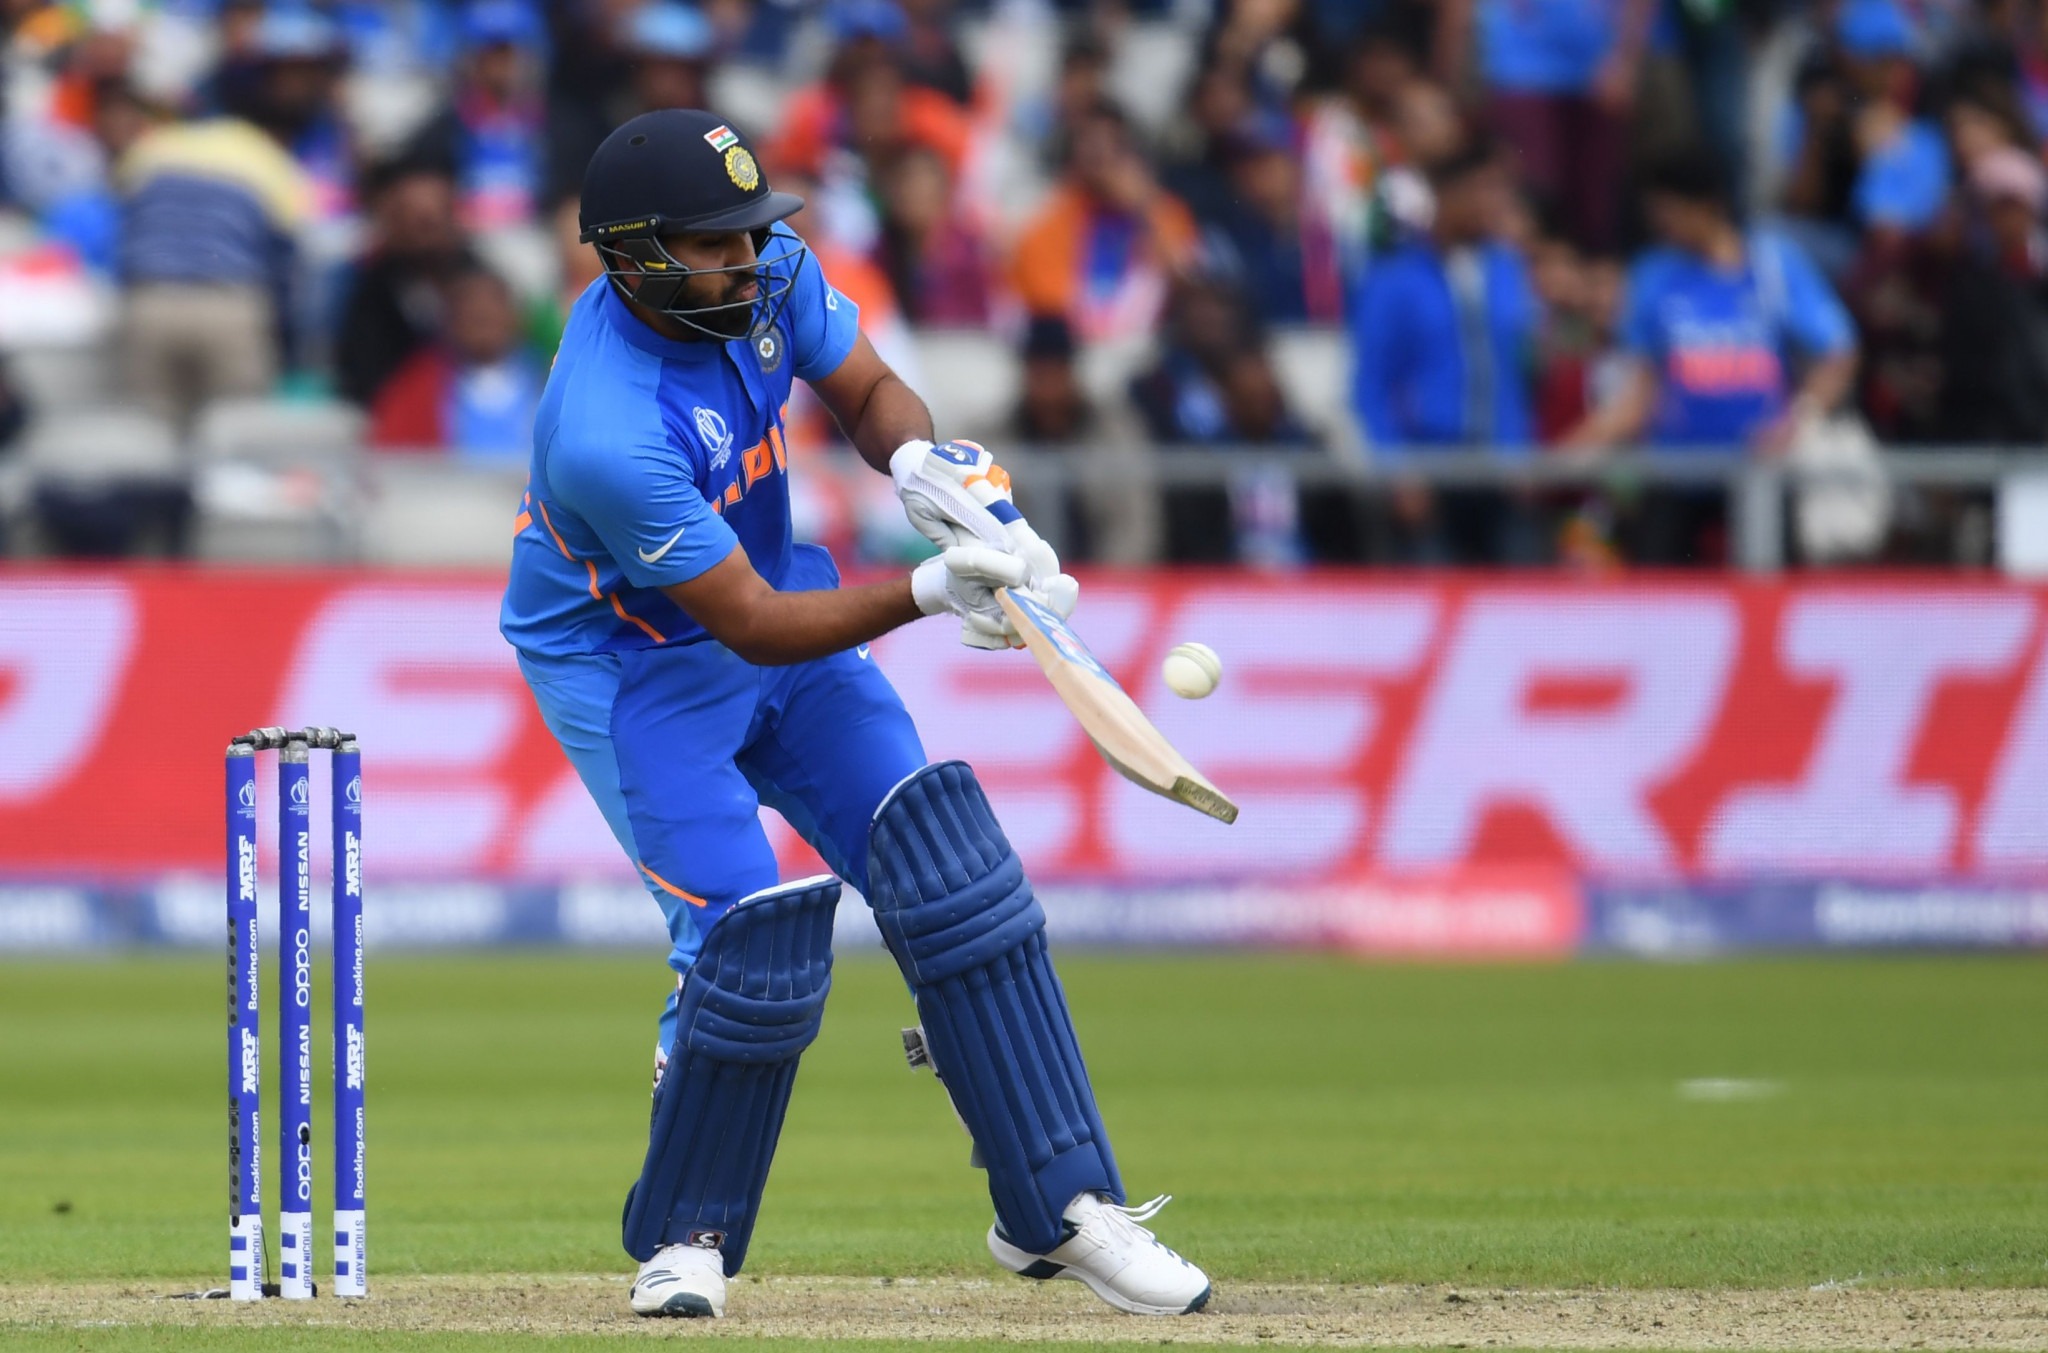 India beat Pakistan in rain-affected ICC Cricket World Cup clash